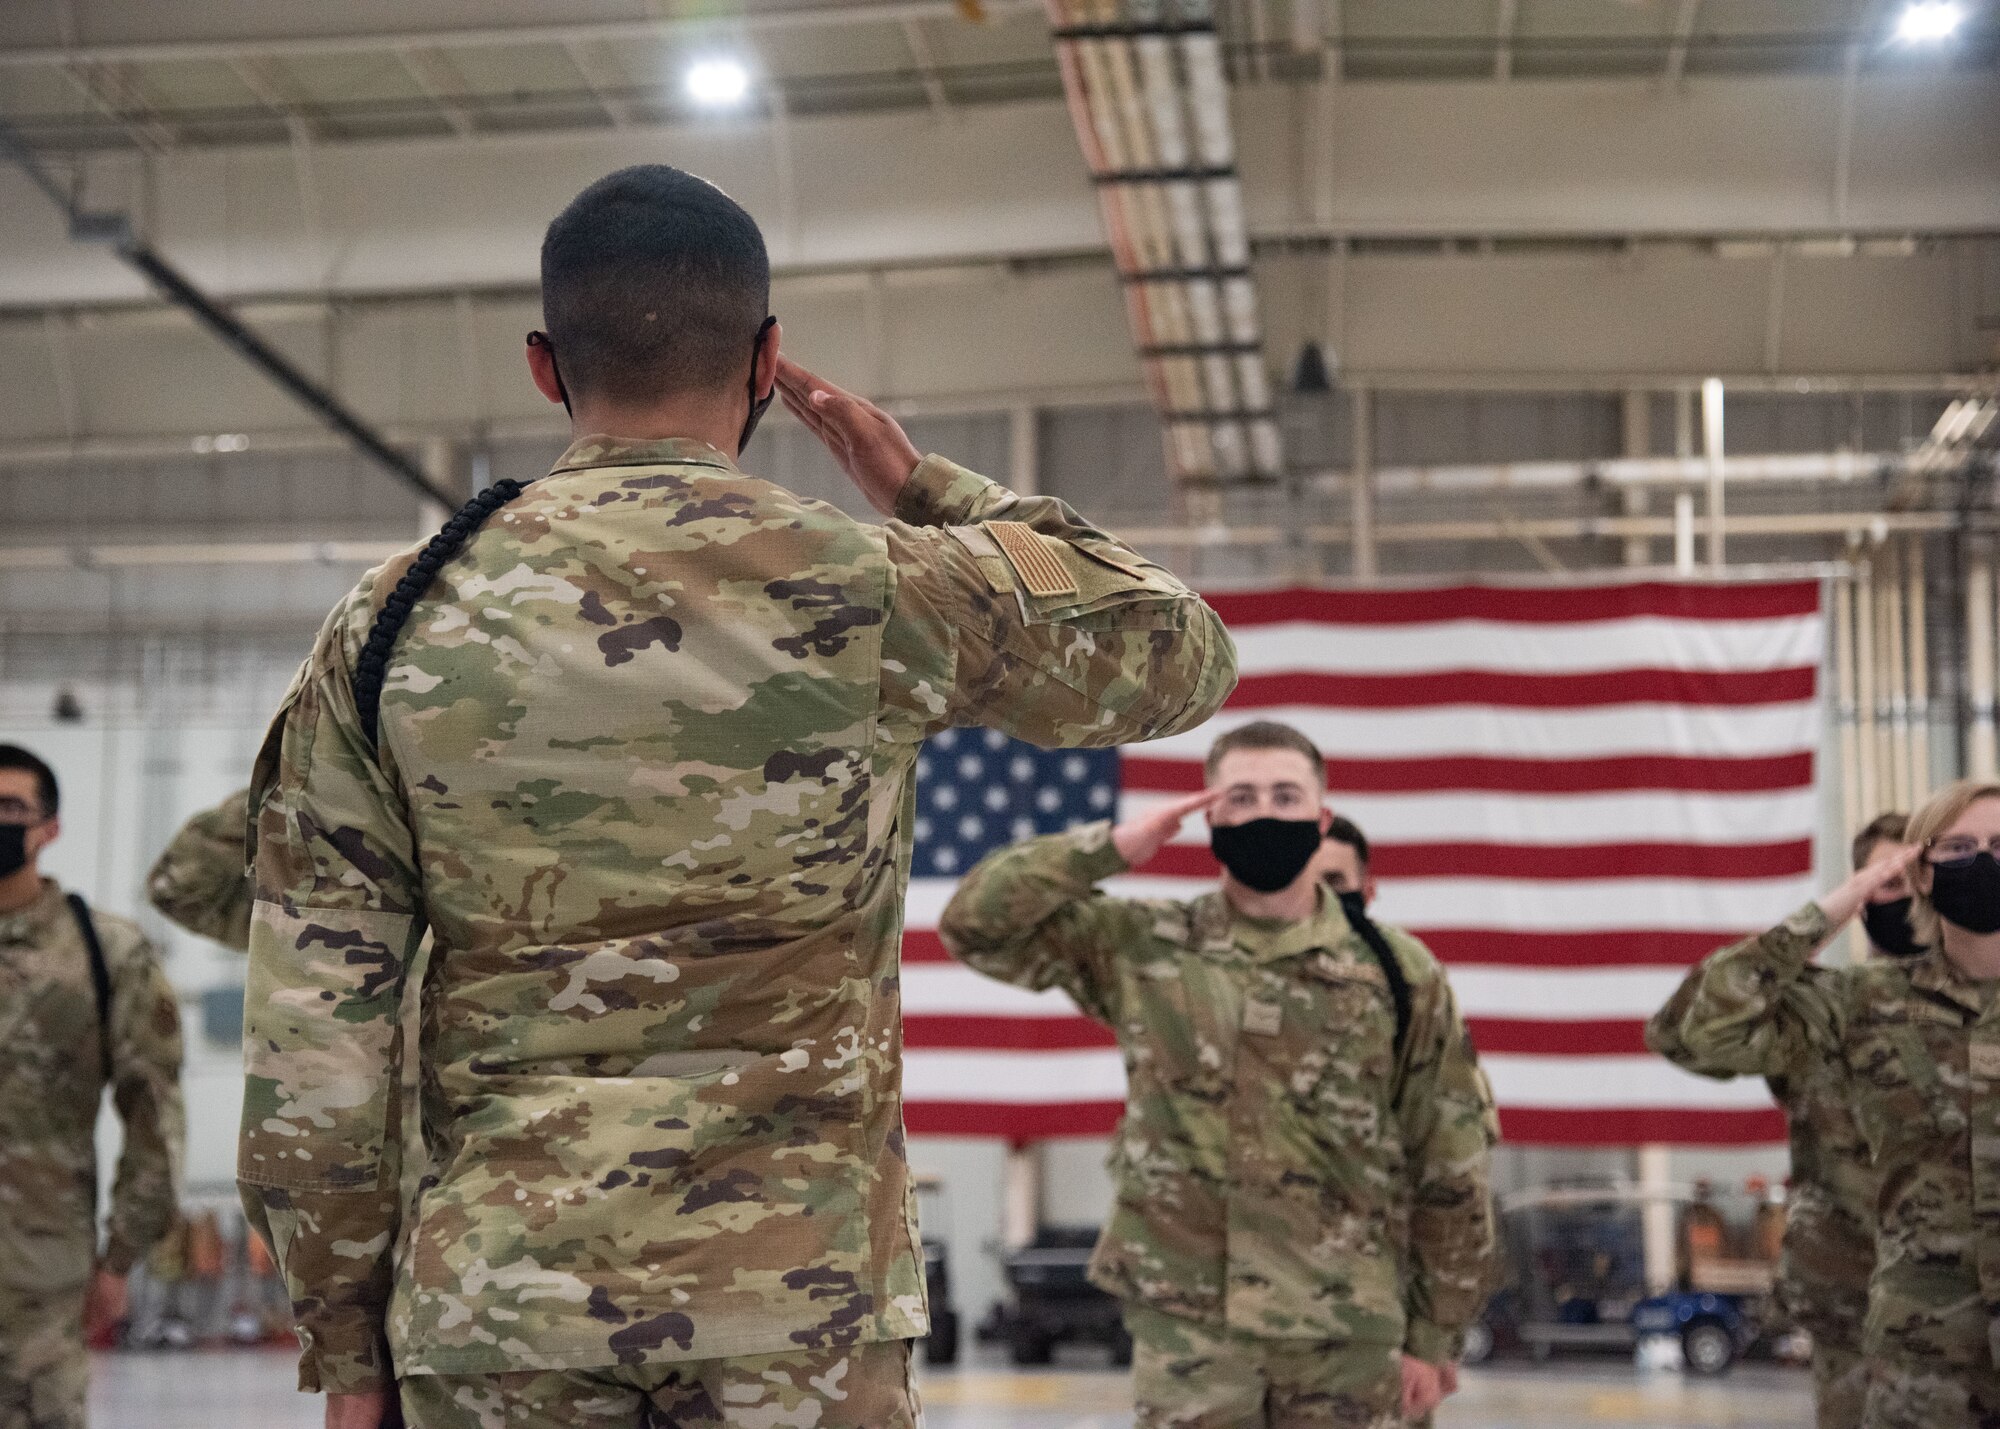 U.S. Air Force Airman 1st Class Jose Delgado, 315th Training Squadron student drill team member, renders a salute along with his fellow Airmen.